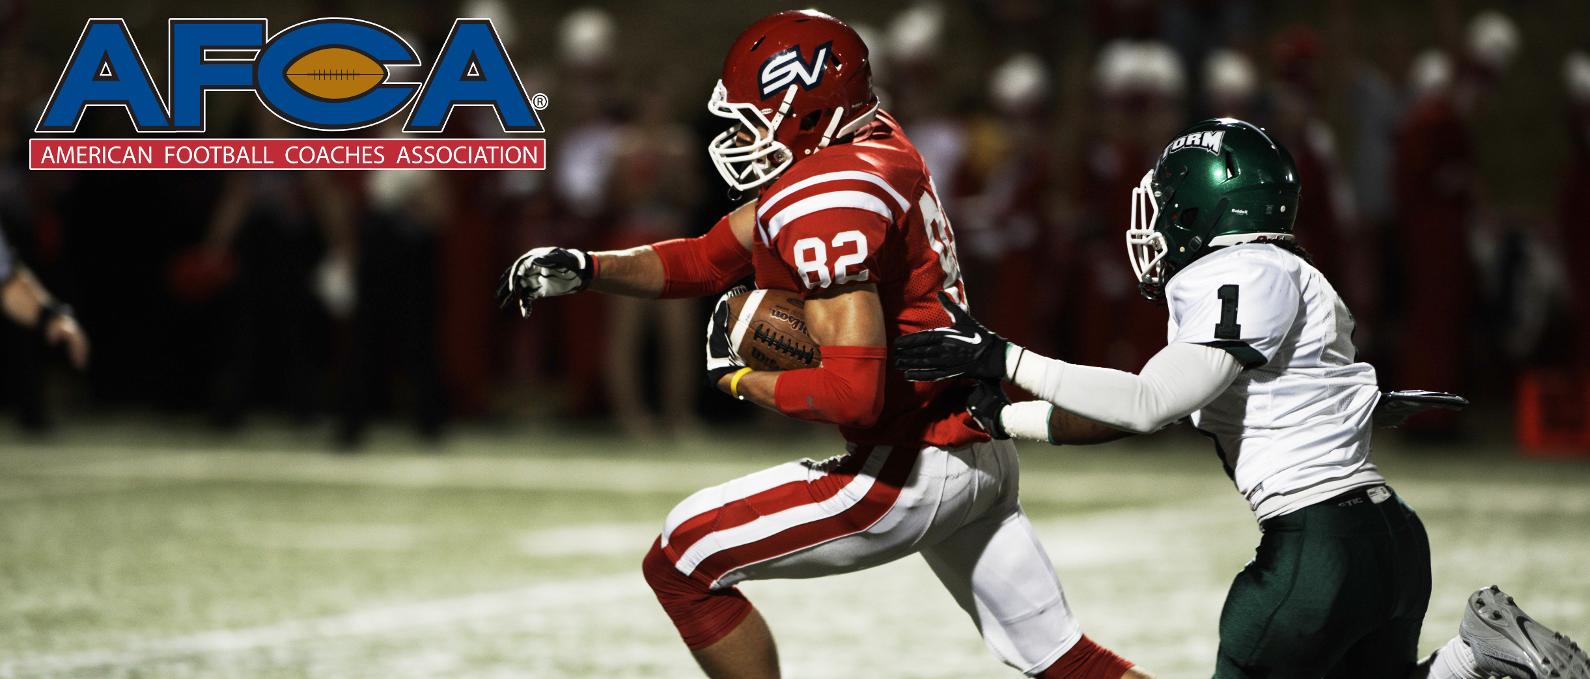 Cardinal Senior Wideout Named To AFCA Division II Coaches' All-America Team